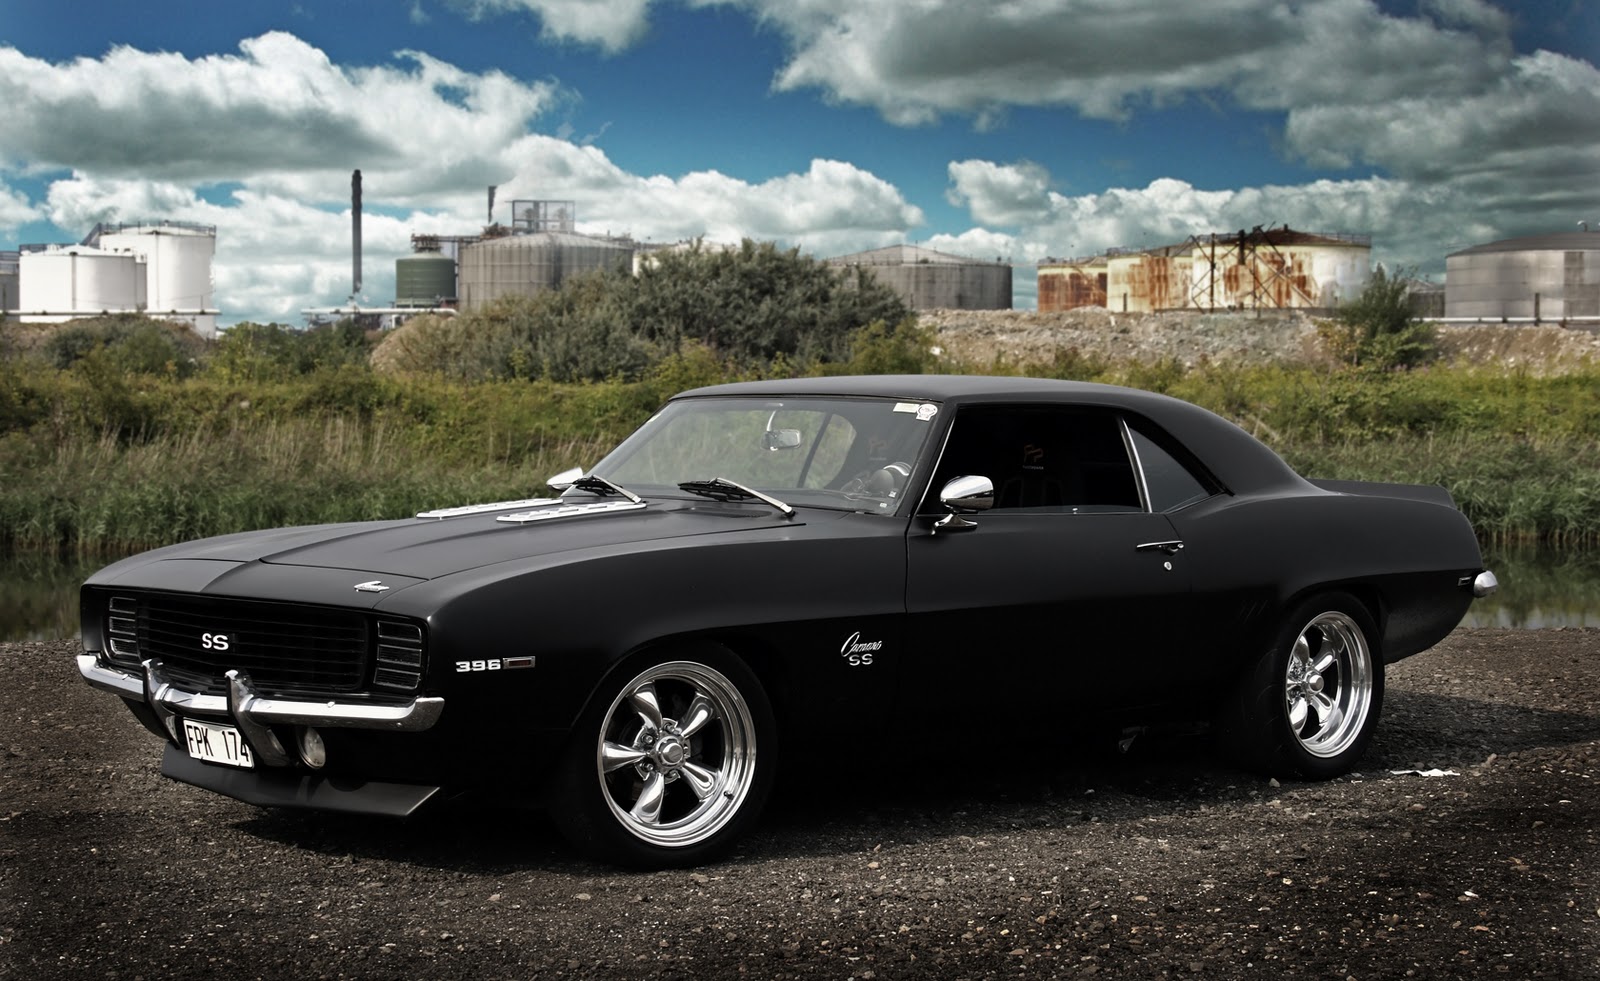 Camaro SS Muscle Cars Black 396 HD Photos Background Vvallpapernet